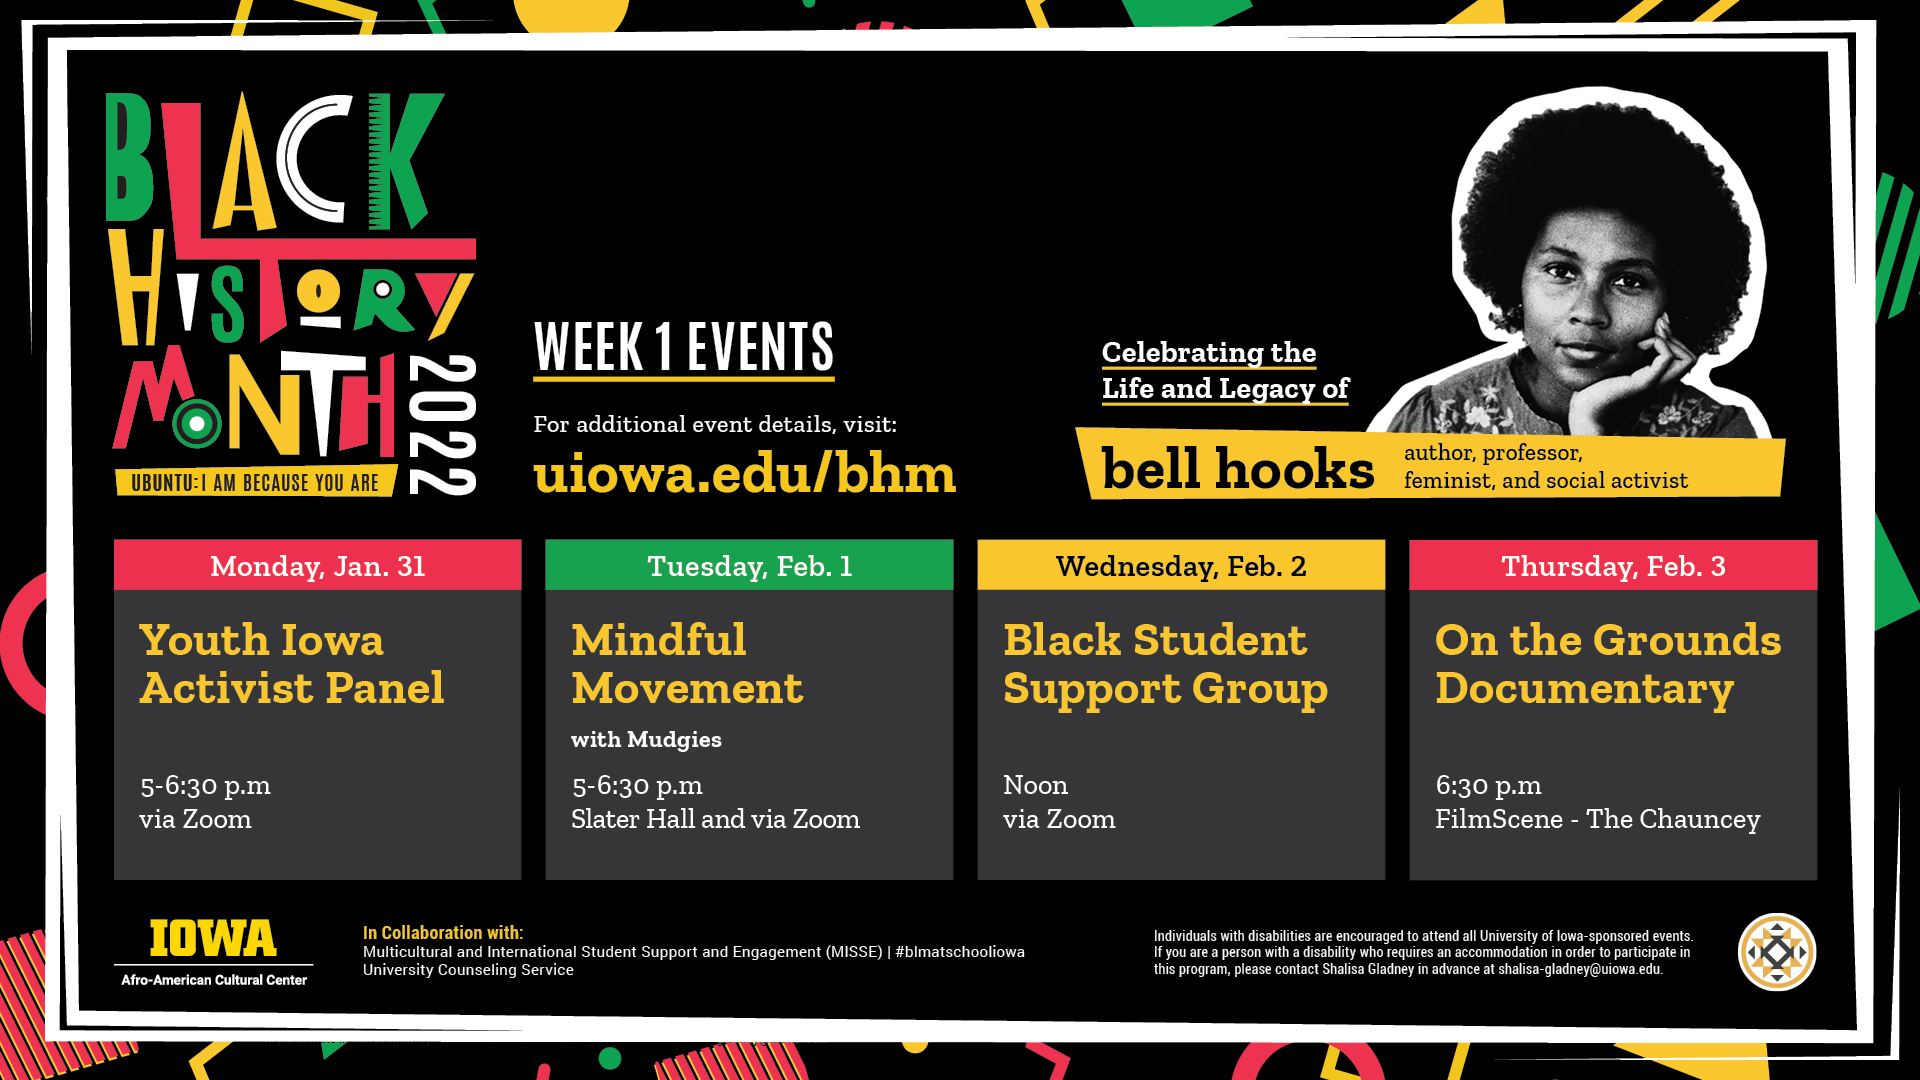 Black History Month 2022 Week 1 events. For additional event details, visit: uiowa.edu/bhm. Celebrating the Life and Legacy of Bell Hooks. author, professor, feminist, and social activist. Monday, Jan. 31 Youth Iowa Activist Panel 5 - 6:30 p.m. Zoom. Tuesday, Feb. 1 Mindful Movement with Mudgies. 5 - 6:30 p.m. Slater Hall and via Zoom. Wednesday, Feb. 2 Black Student Support Group. Noon via Zoom. Thursday, Feb. 3 On the Grounds Documentary. 6:30 p.m. FilmScene - The Chauncey.